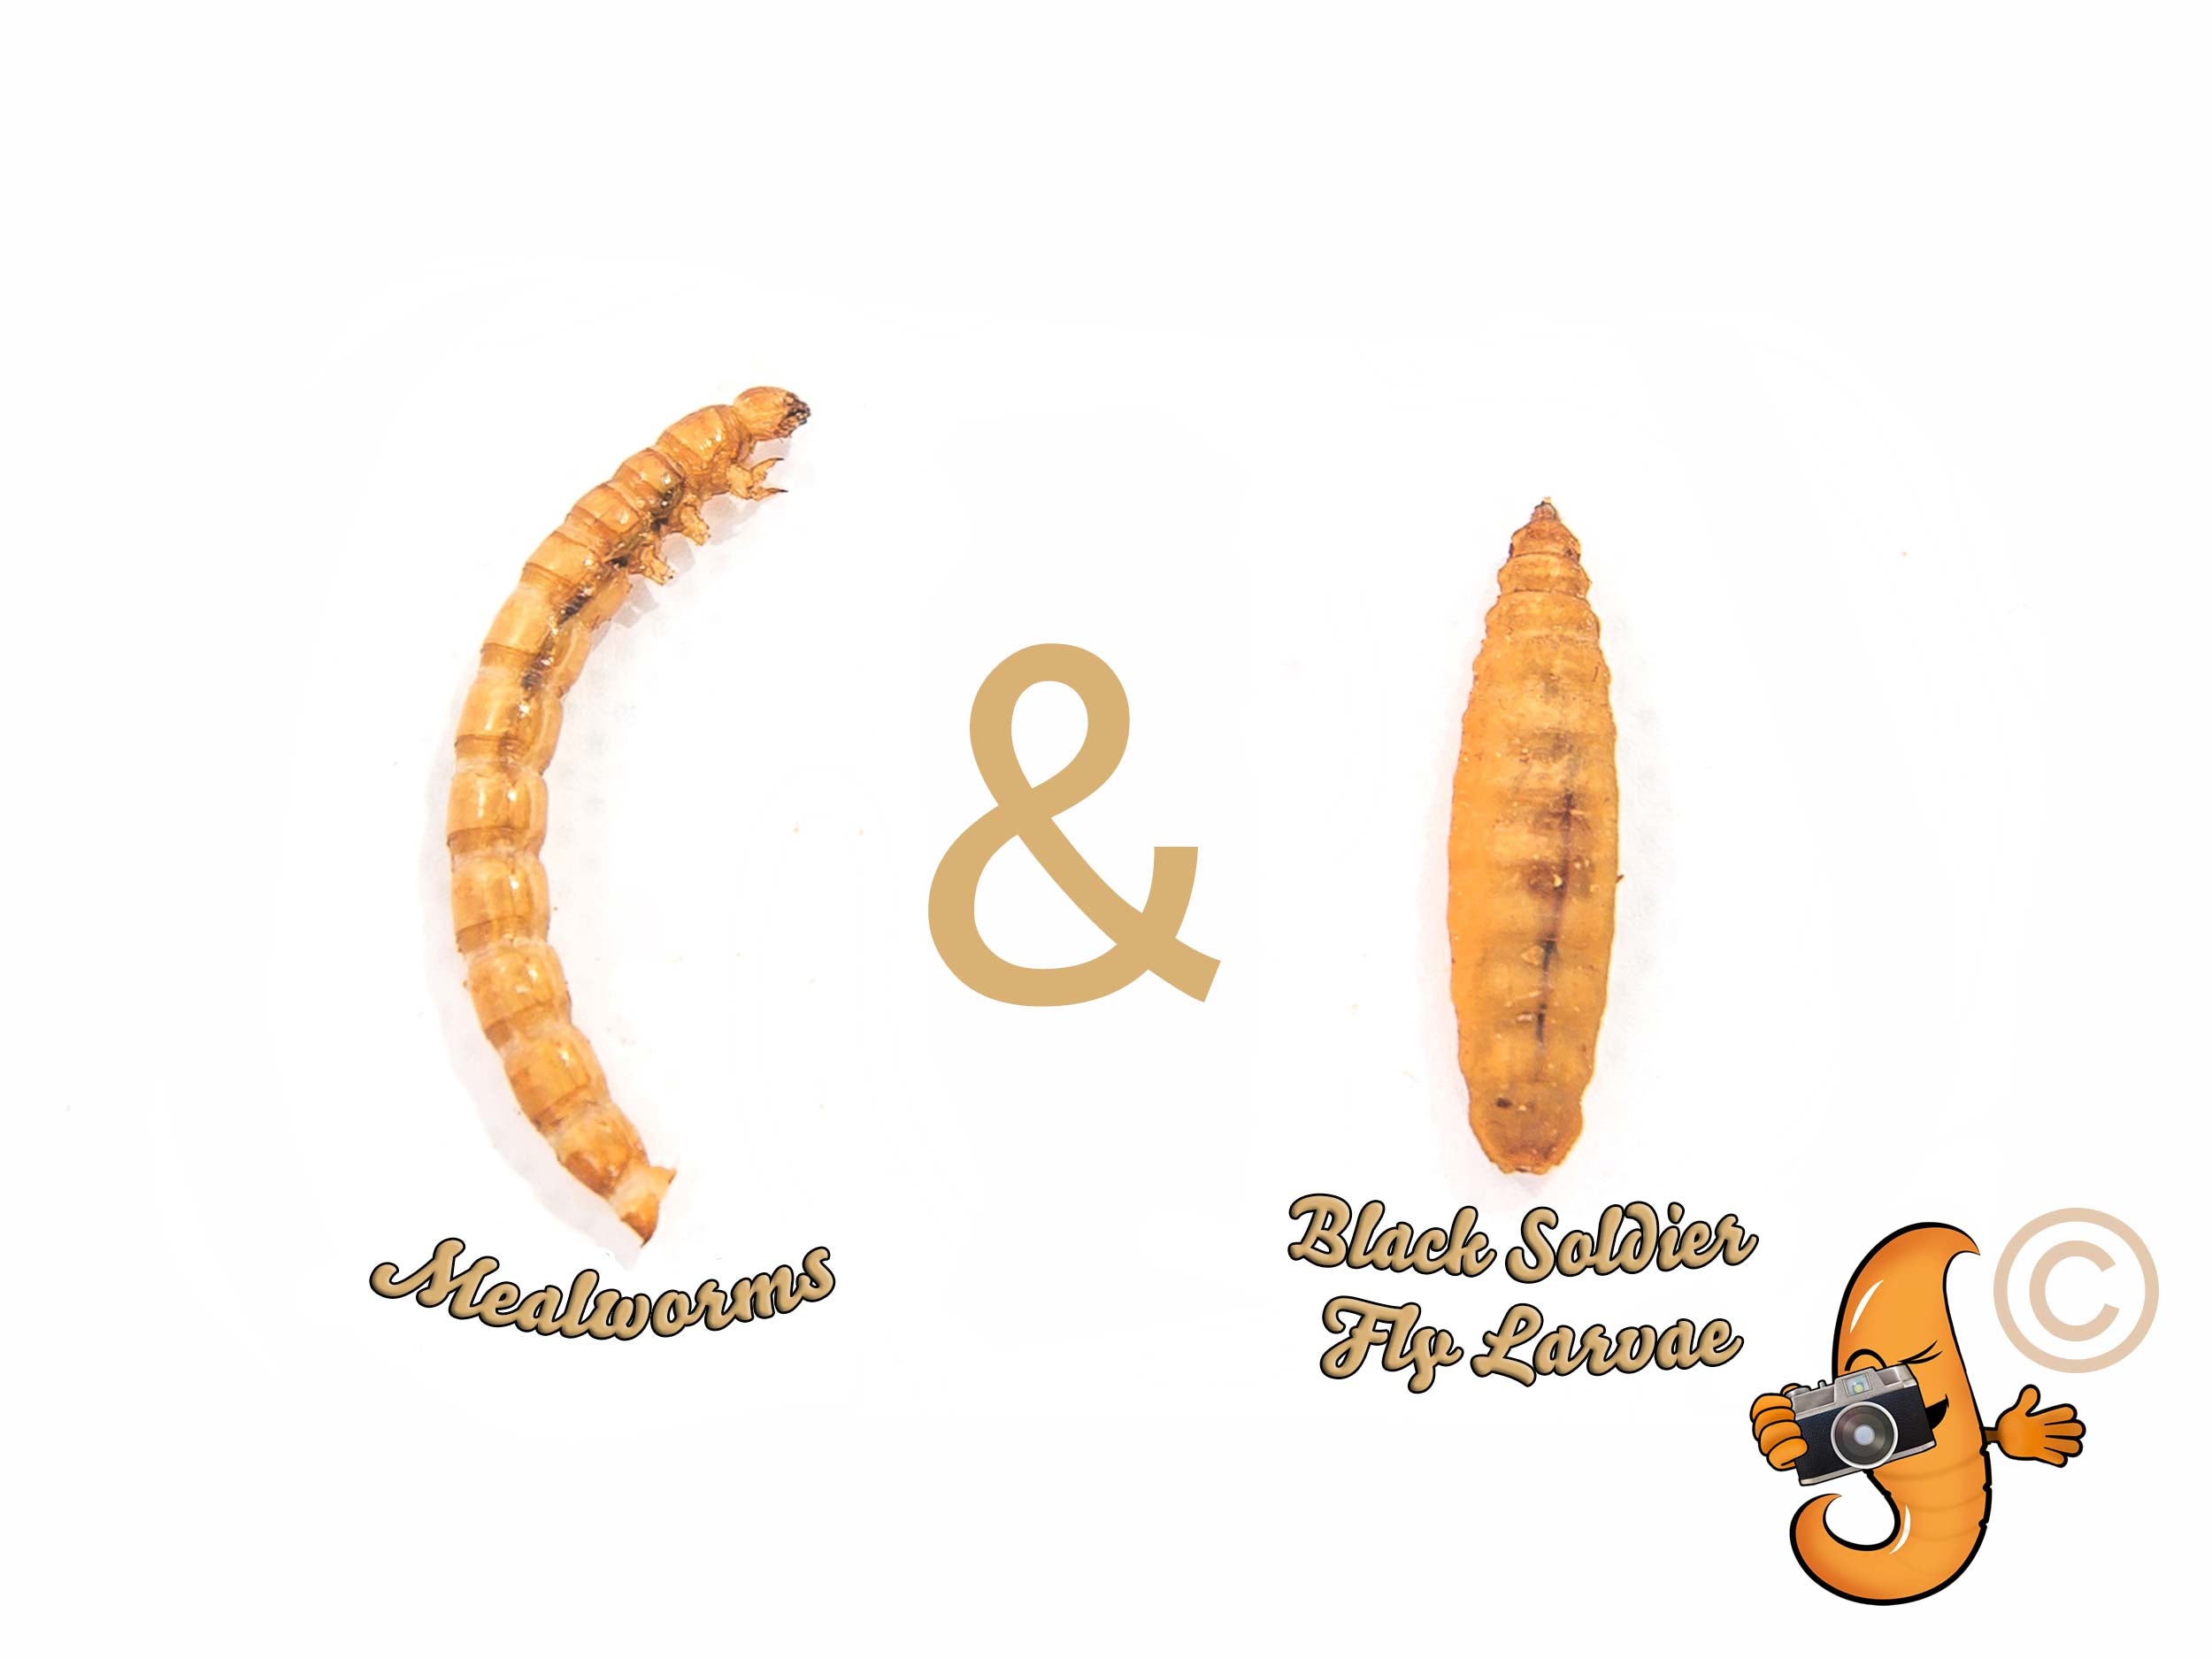 908g (2lb) Chubby Mix (Mealworm & Black Soldier Fly Larvae)